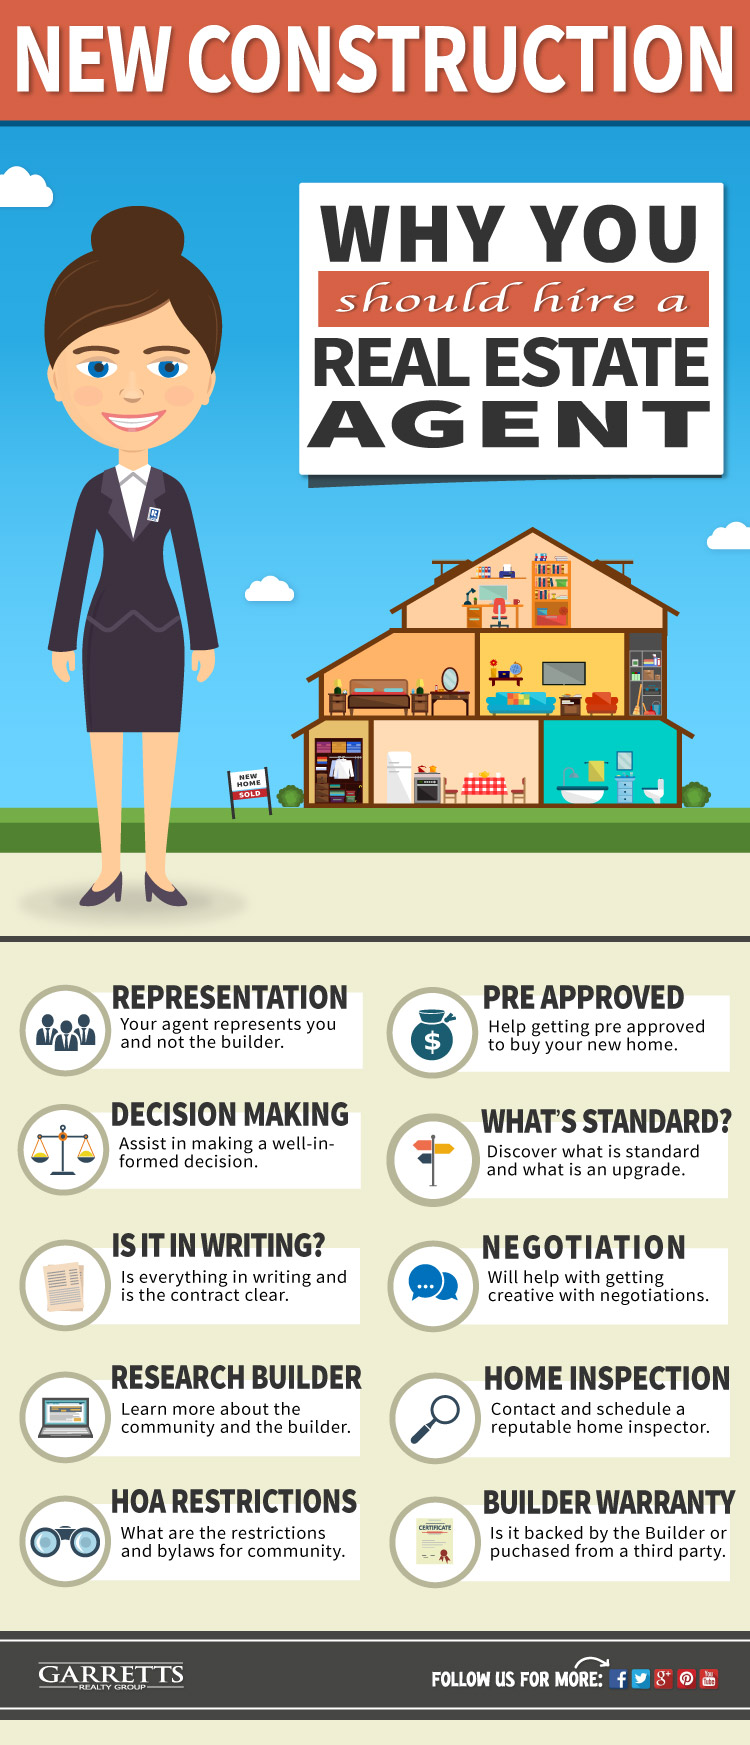 Learn why you should hire a REALTOR when buying a new construction home - Infographic.